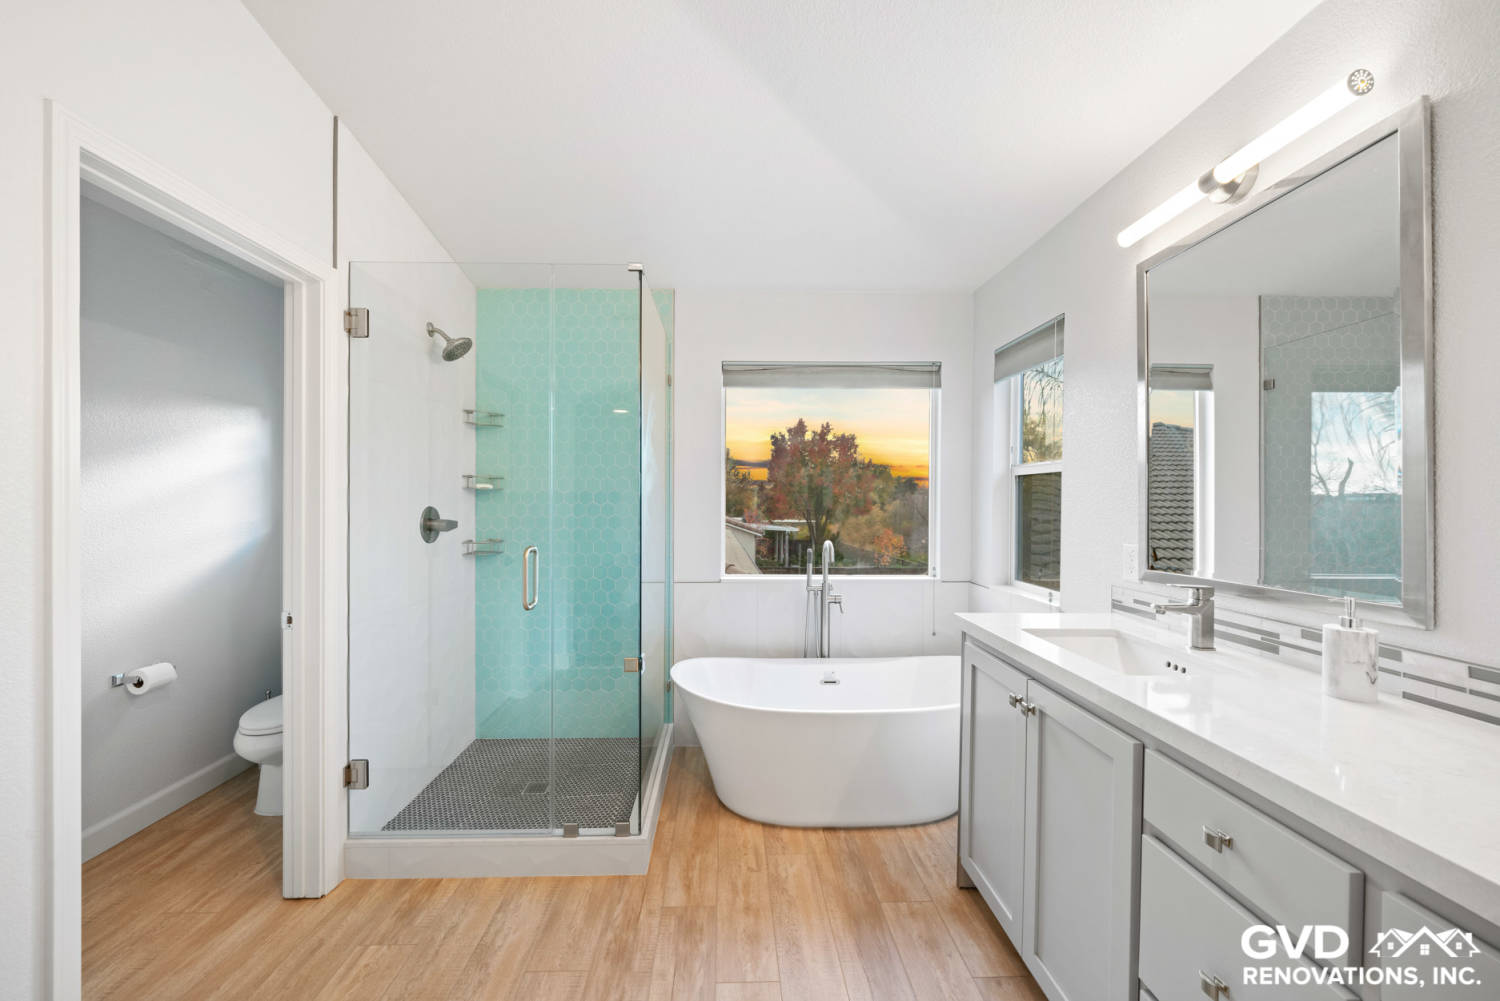 How Much Is The Average Cost Of A Bathroom Remodel - How Much To Remodel A Bathroom In California